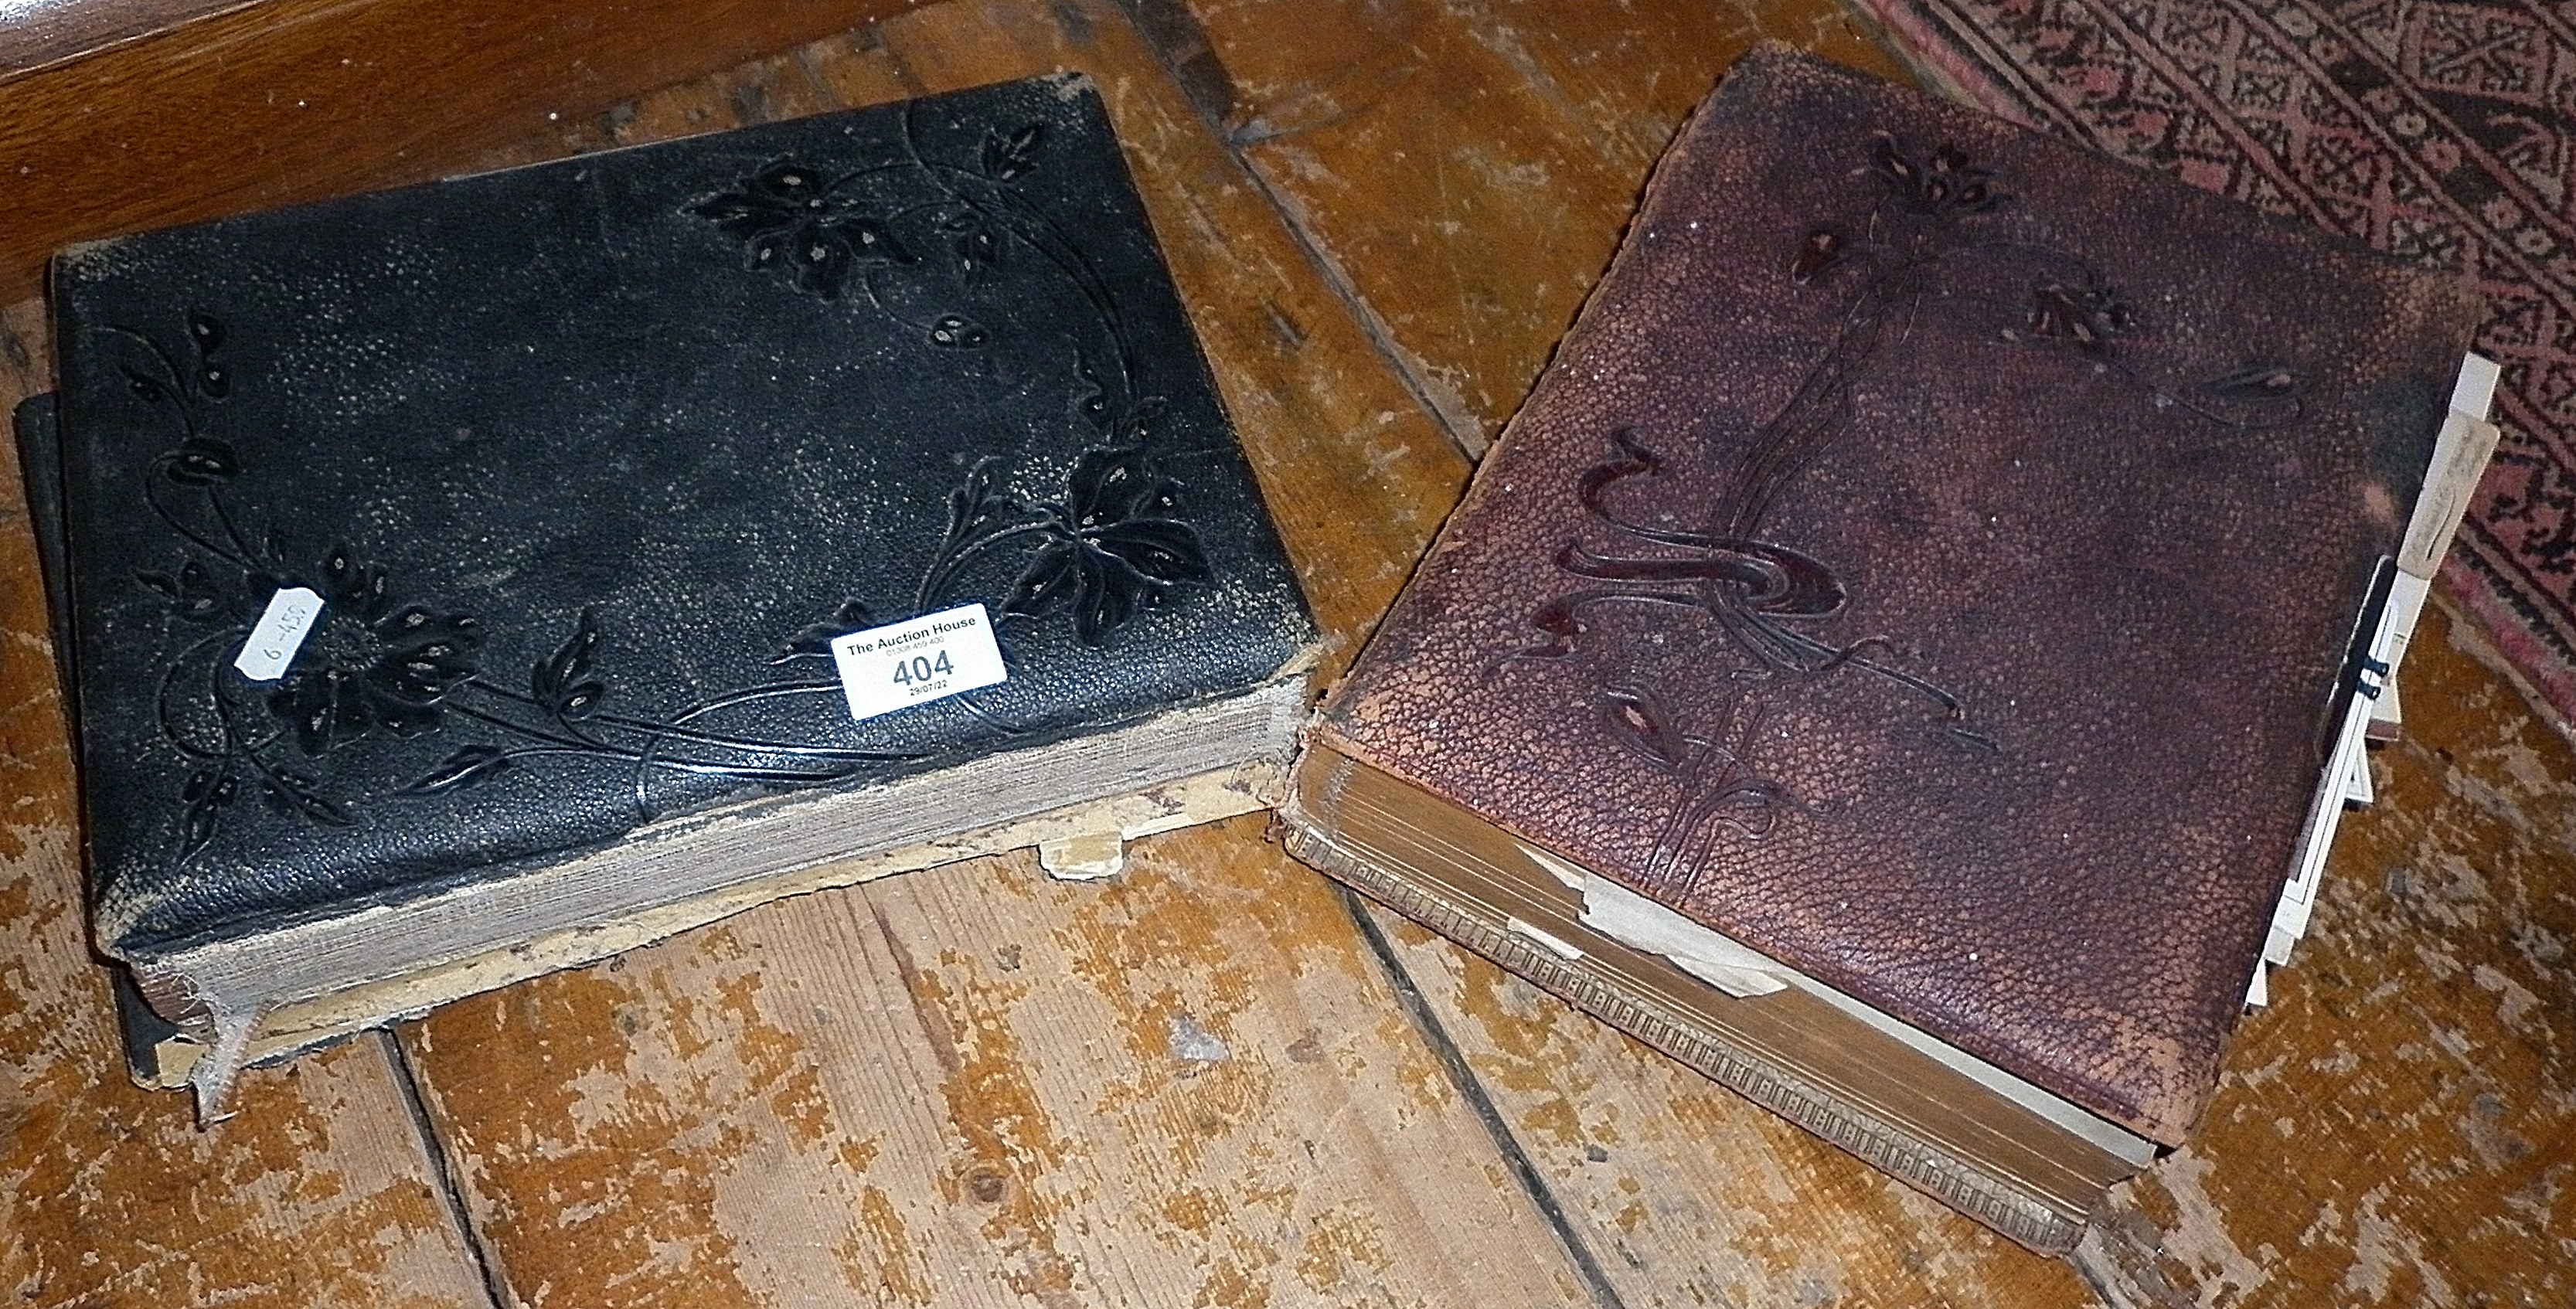 Two Victorian albums of cartes des visite and cabinet cards